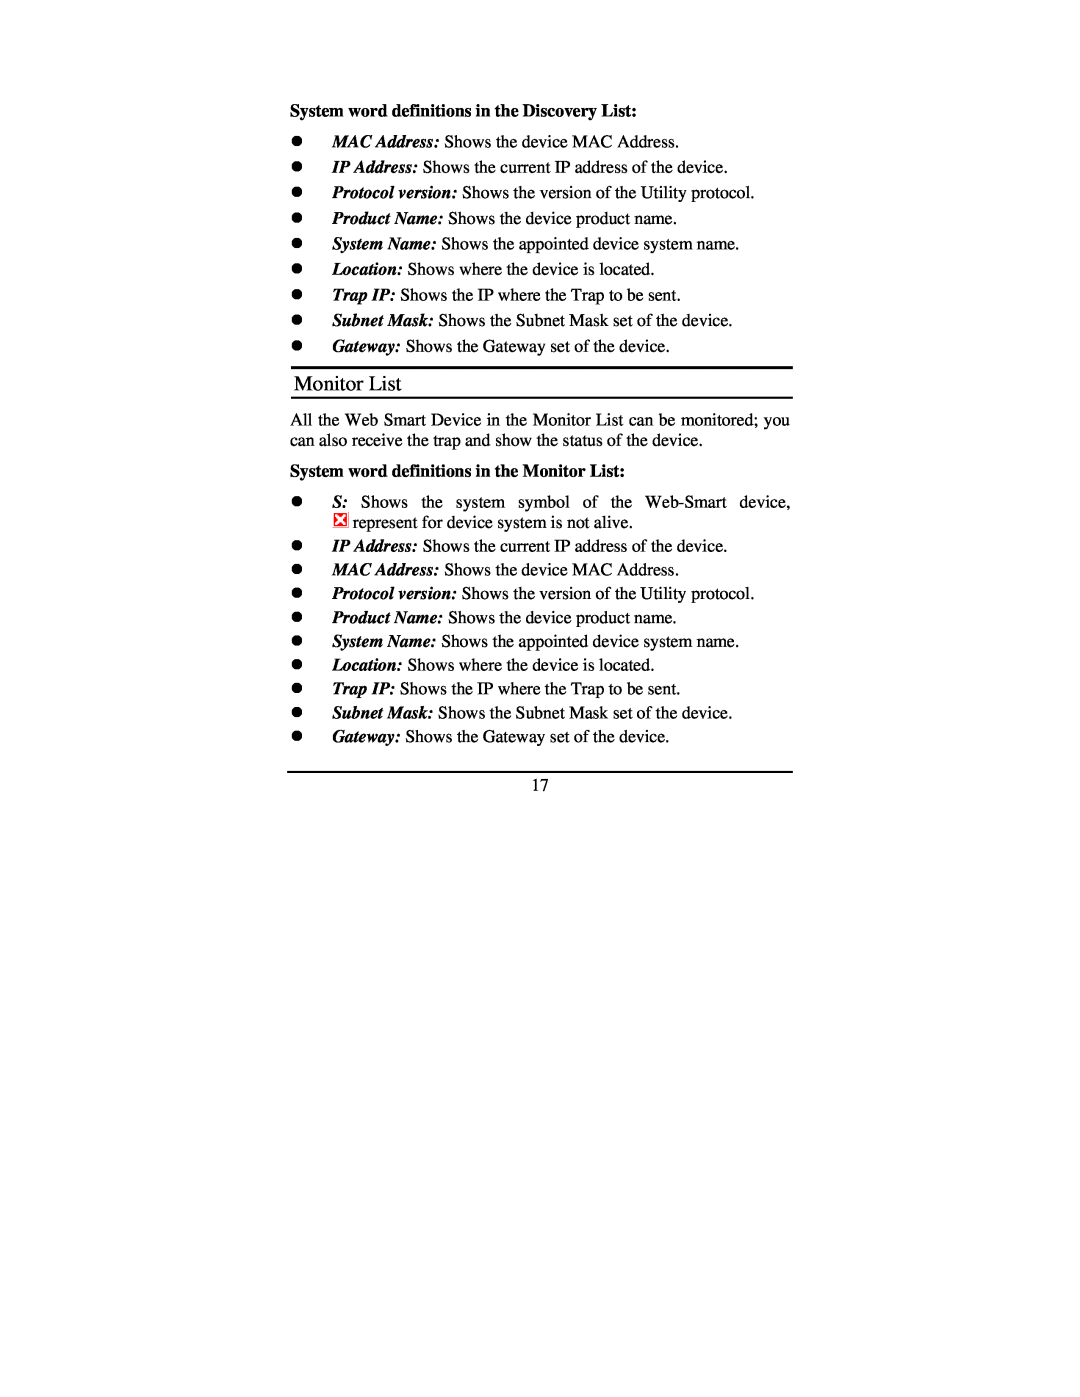 TRENDnet TEG-448WS manual Monitor List, System word definitions in the Discovery List 